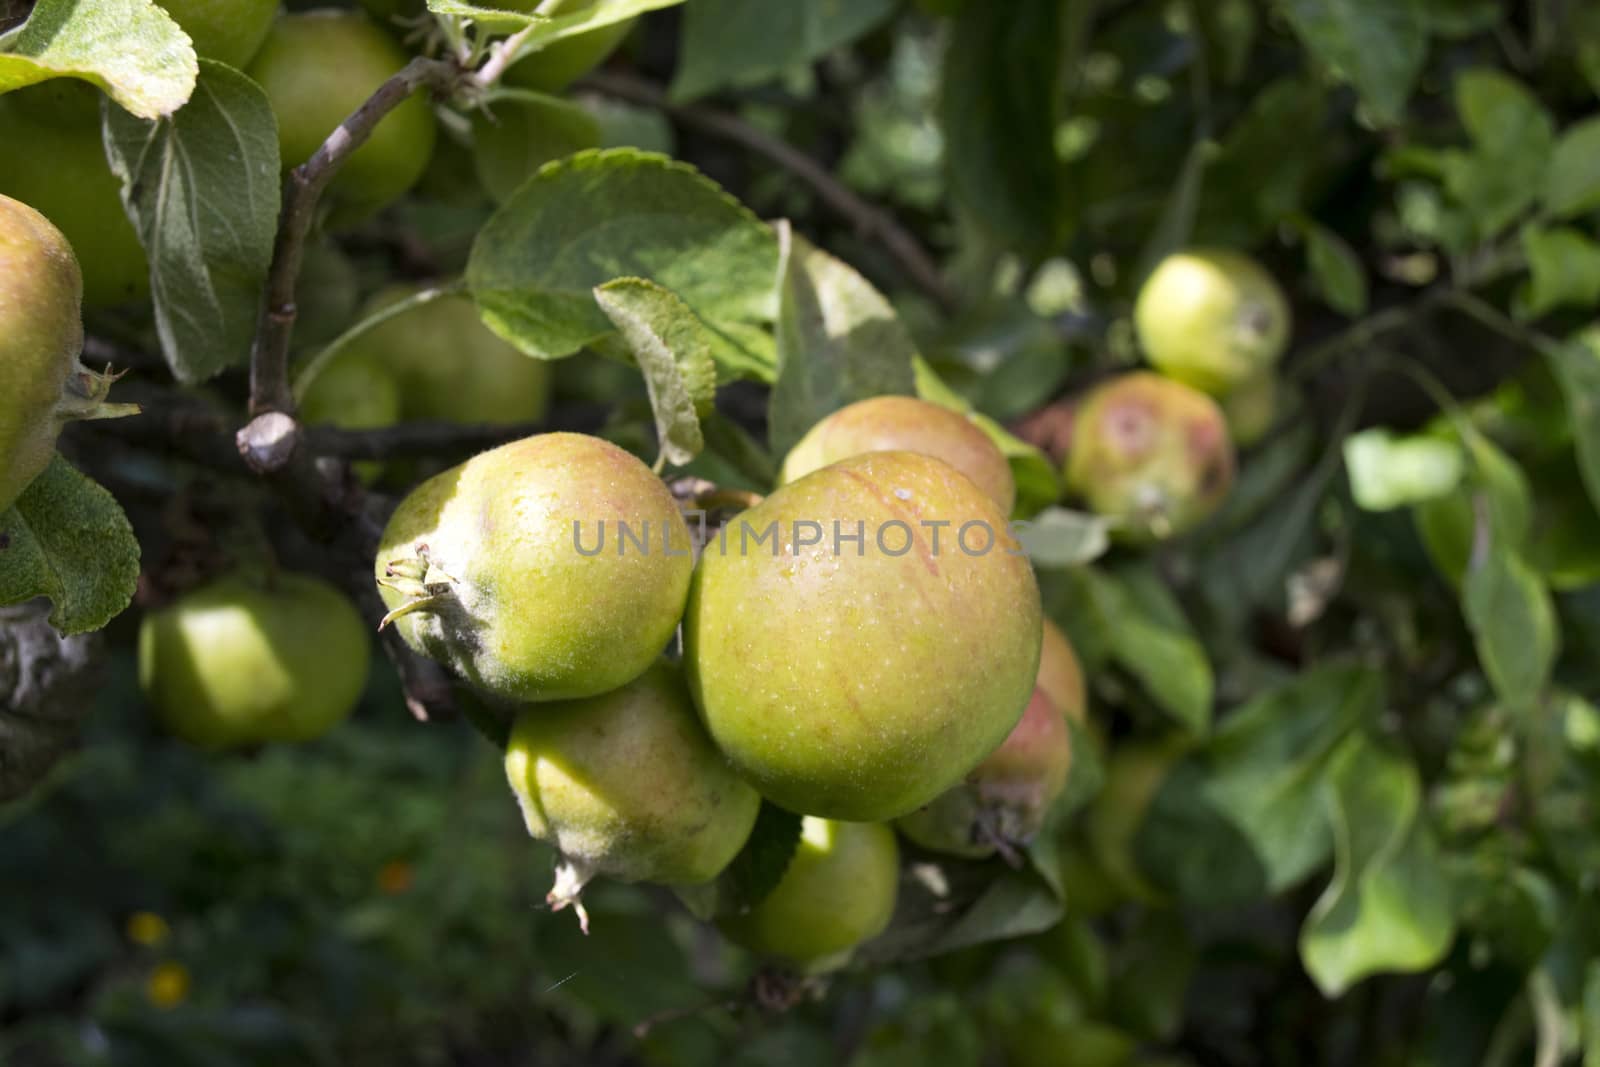 Unpicked apples hanging from a tree in summer